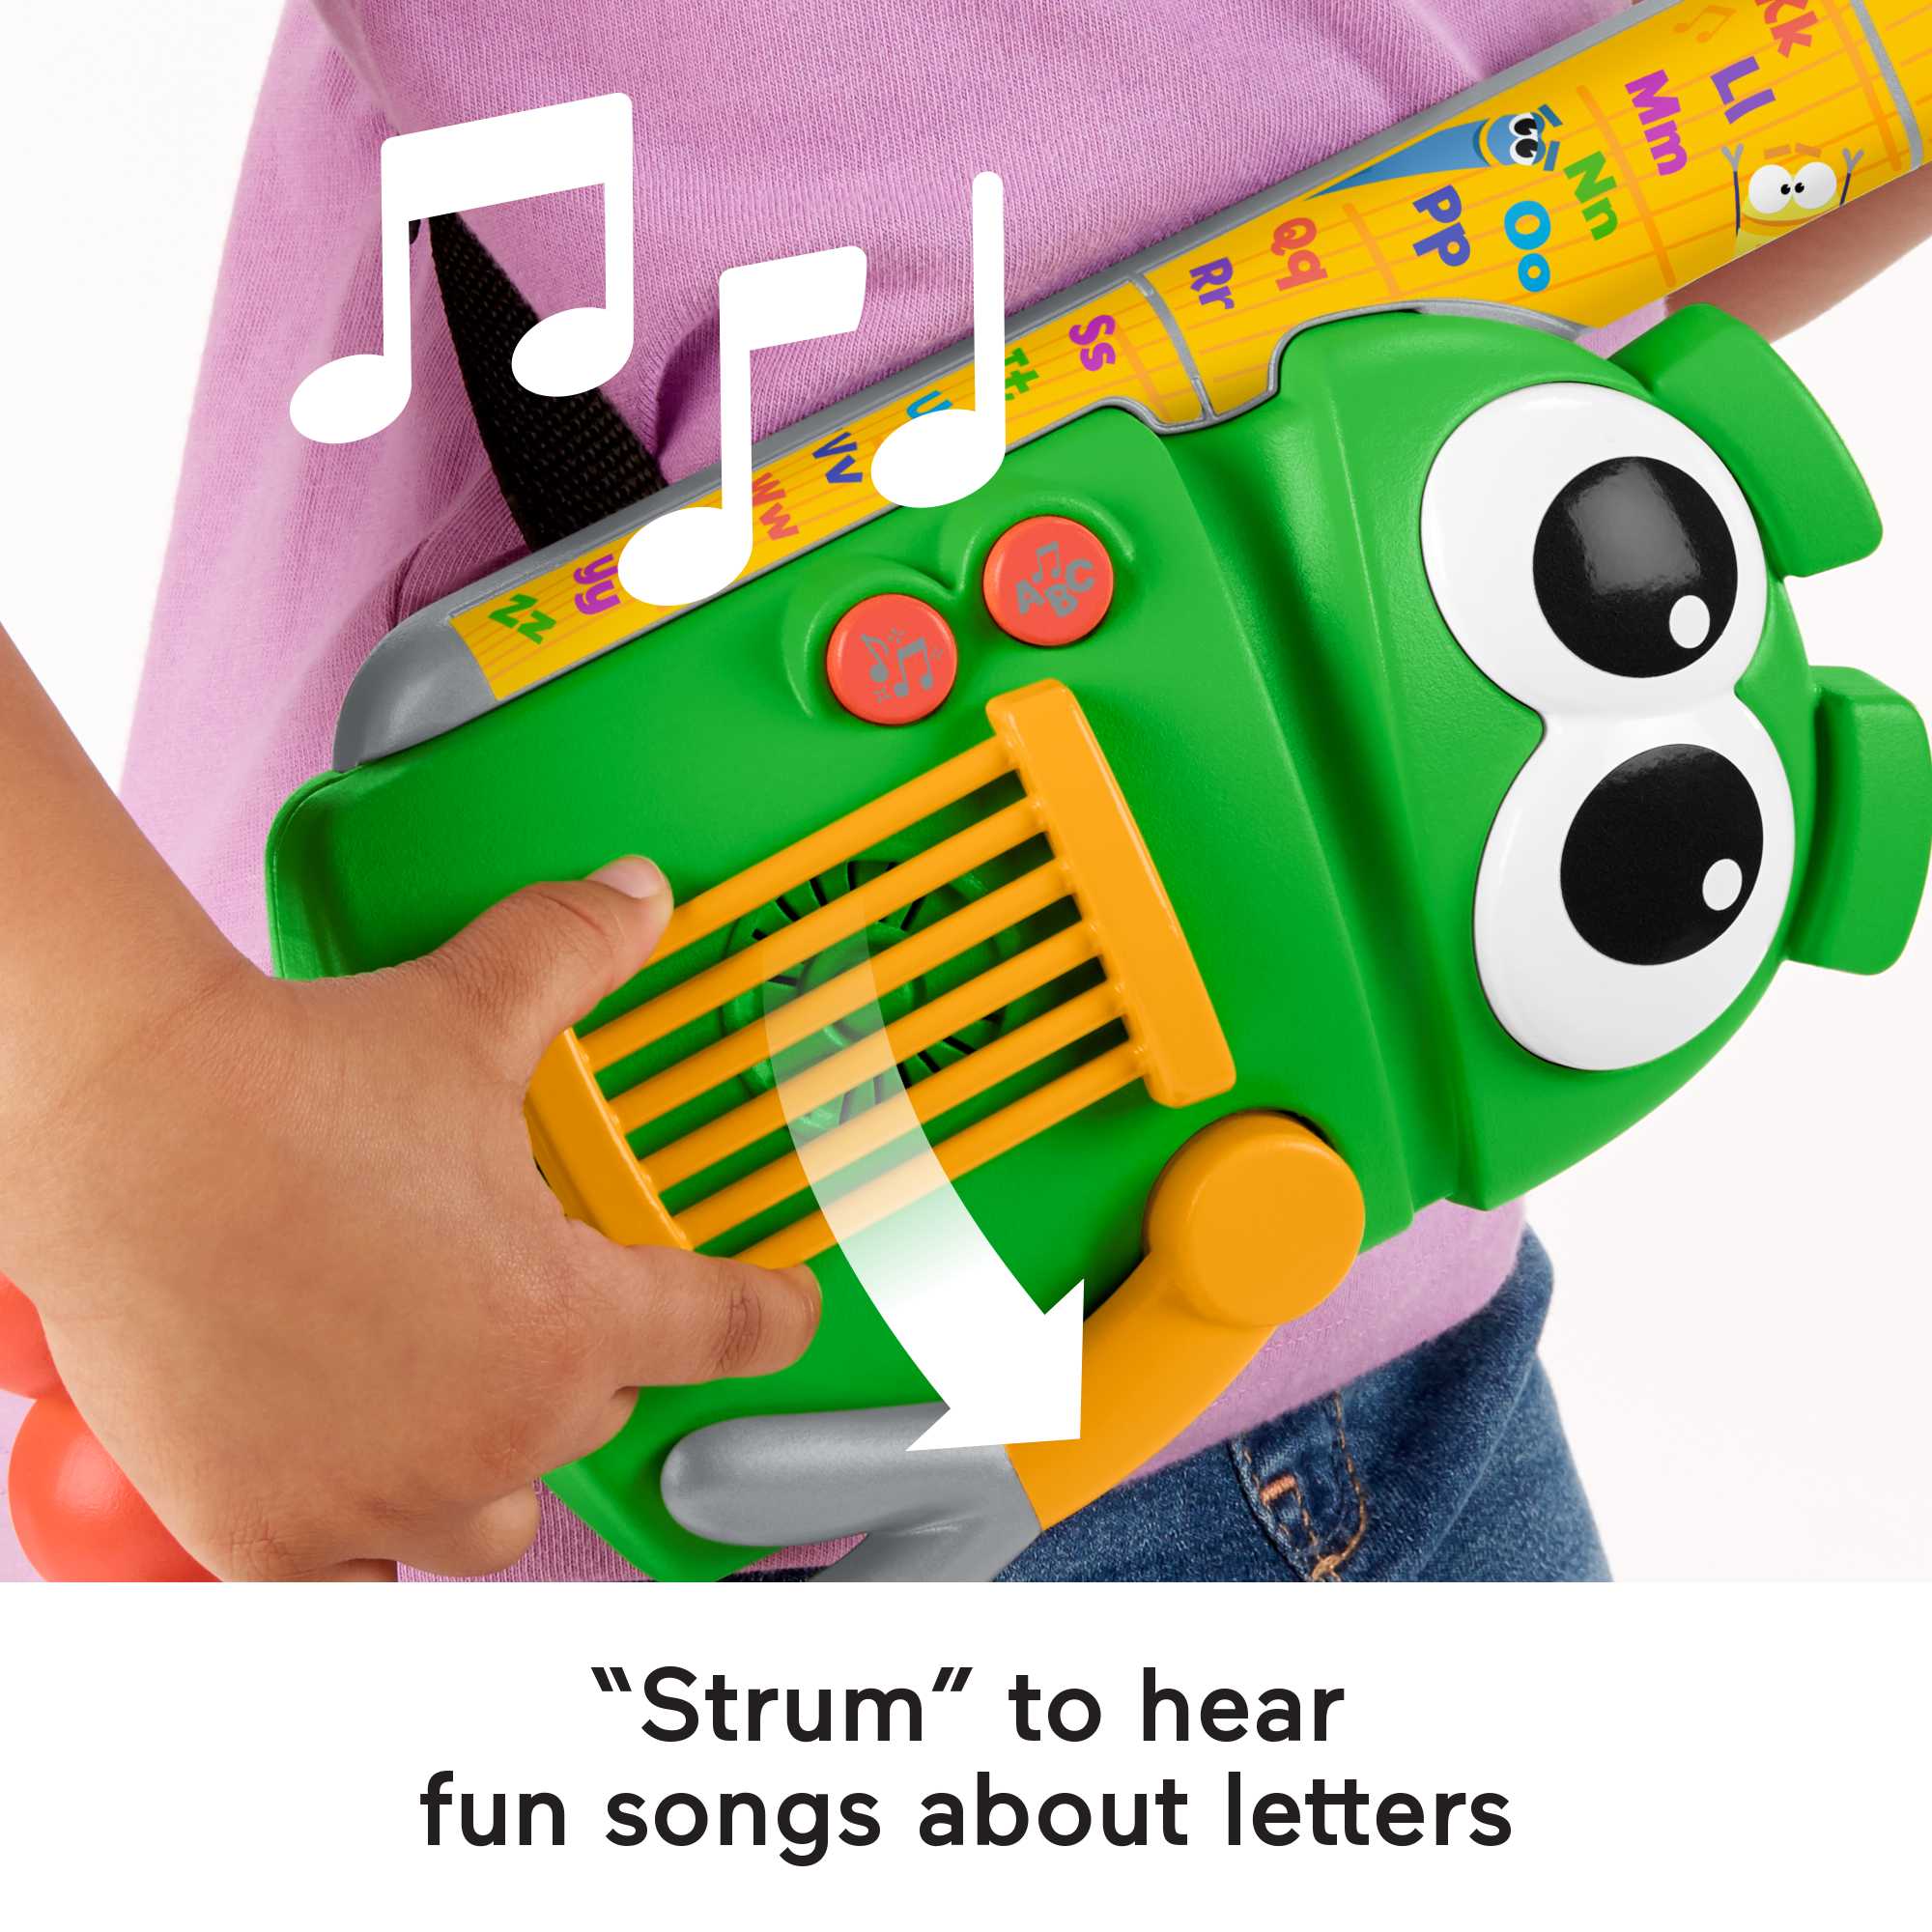 Fisher-Price StoryBots A to Z Rock Star Guitar Musical Learning Toy - image 5 of 7